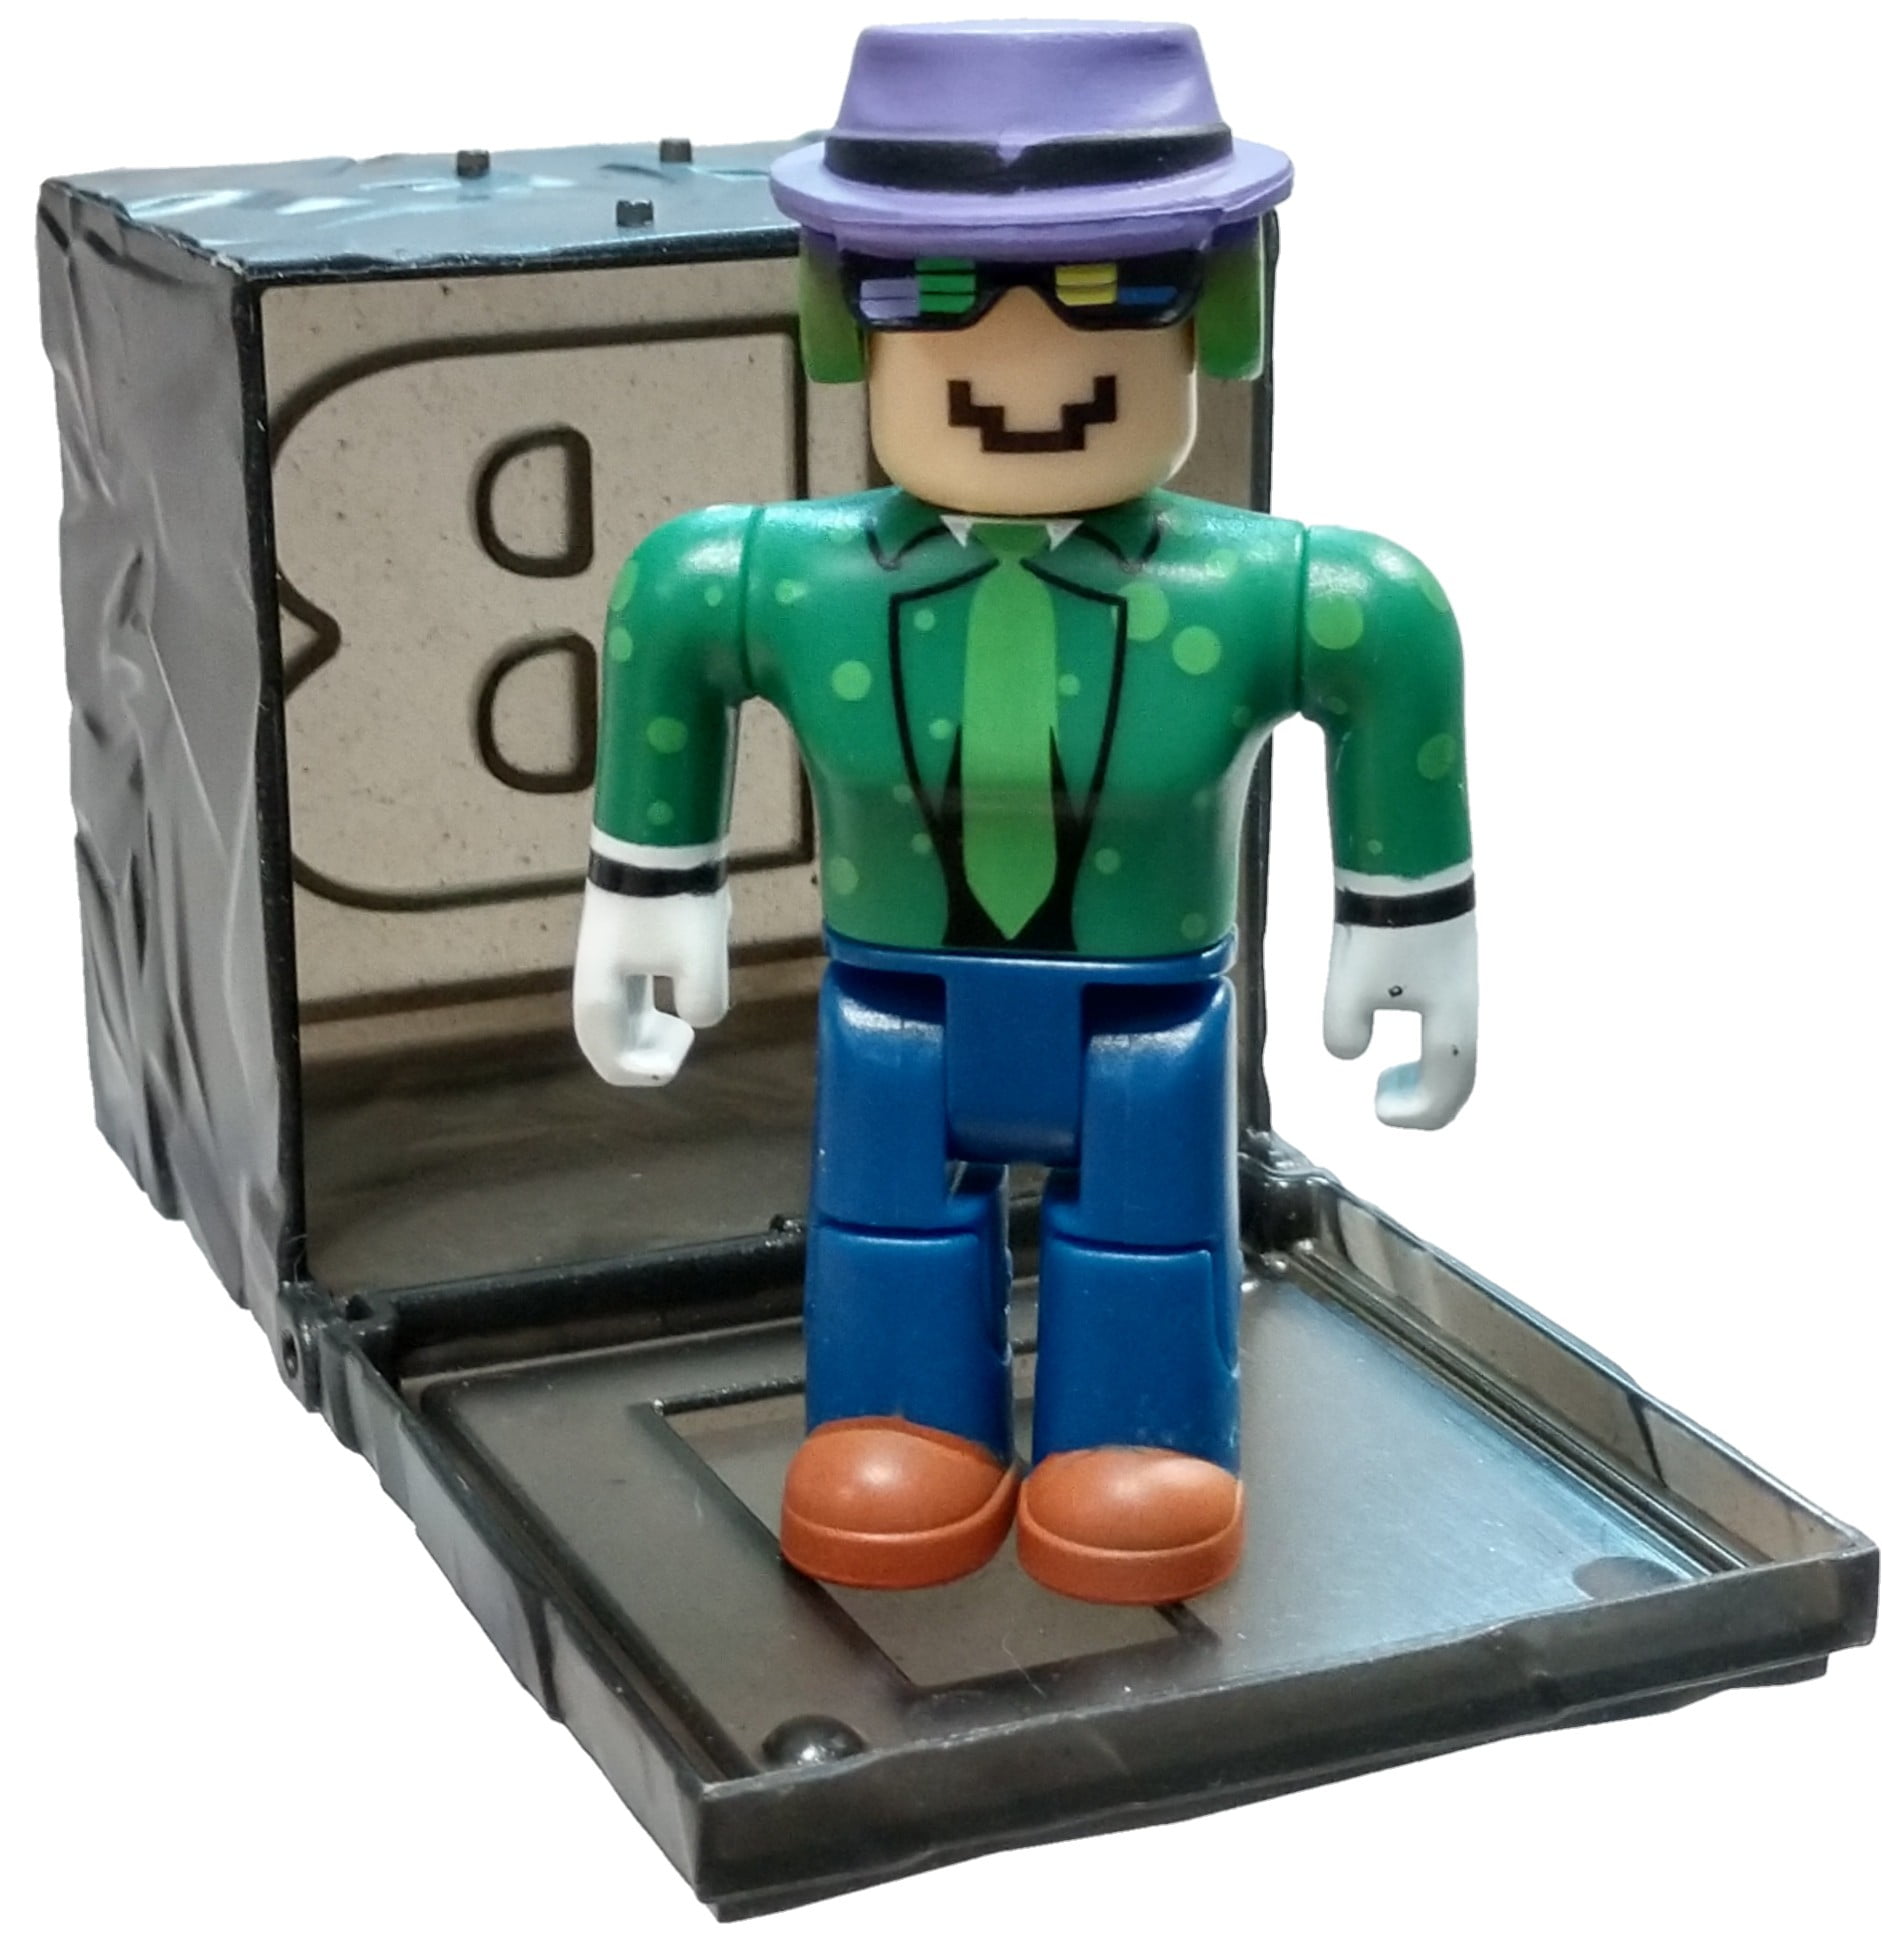 Roblox Series 7 Mrwindy Mini Figure With Black Cube And Online Code No Packaging Walmart Com Walmart Com - roblox black hat codes